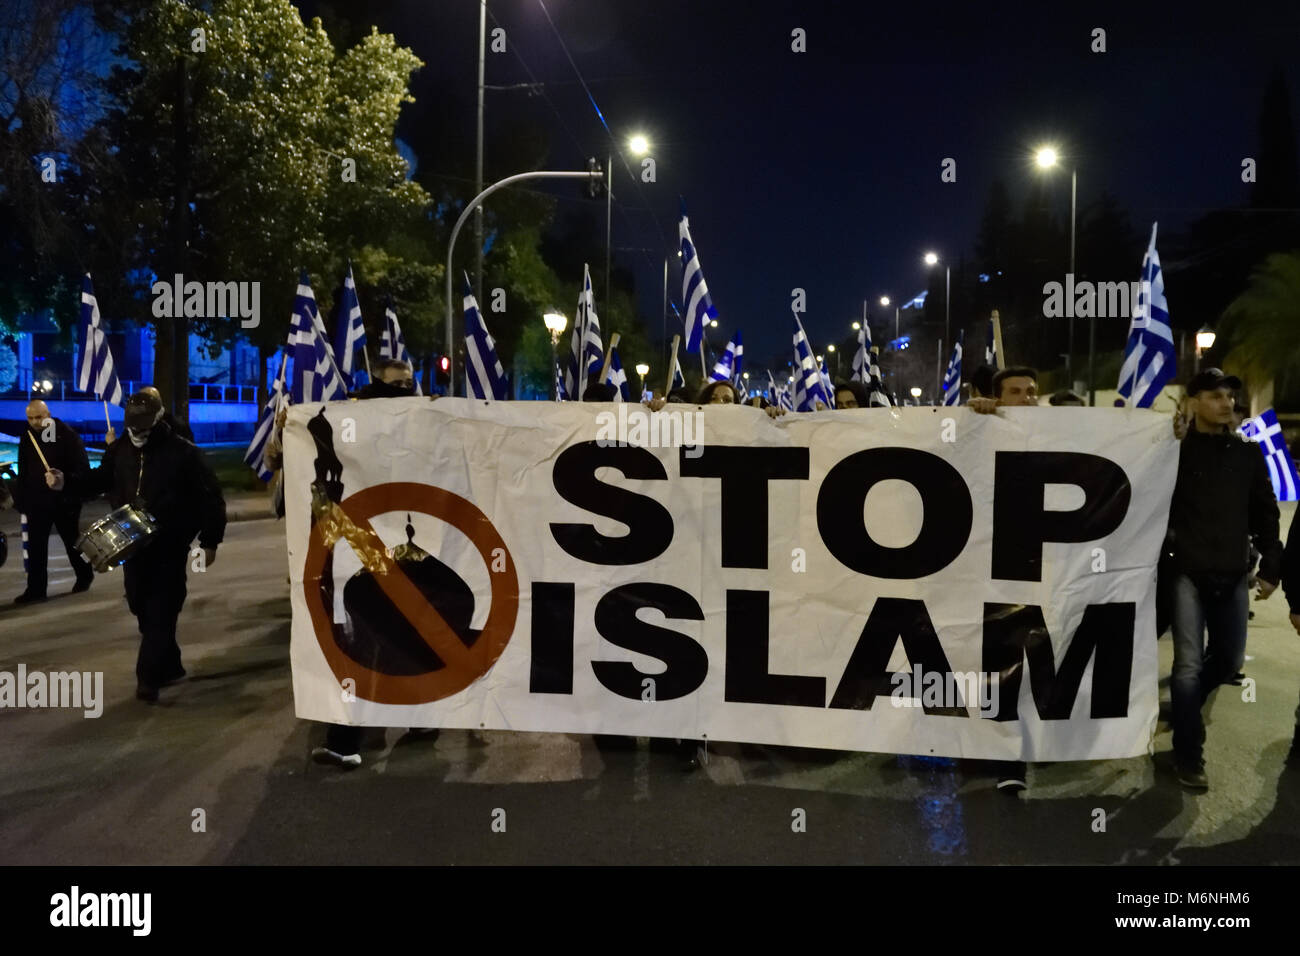 Athens, Greece, 5th March, 2018. Golden Dawn supporters march holding a banner that reads 'Stop Islam' to protest against the arrest of two Greek army officers while patrolling the Greek-Turkish border by Turkish forces in Athens, Greece. Credit: Nicolas Koutsokostas/Alamy Live News. Stock Photo